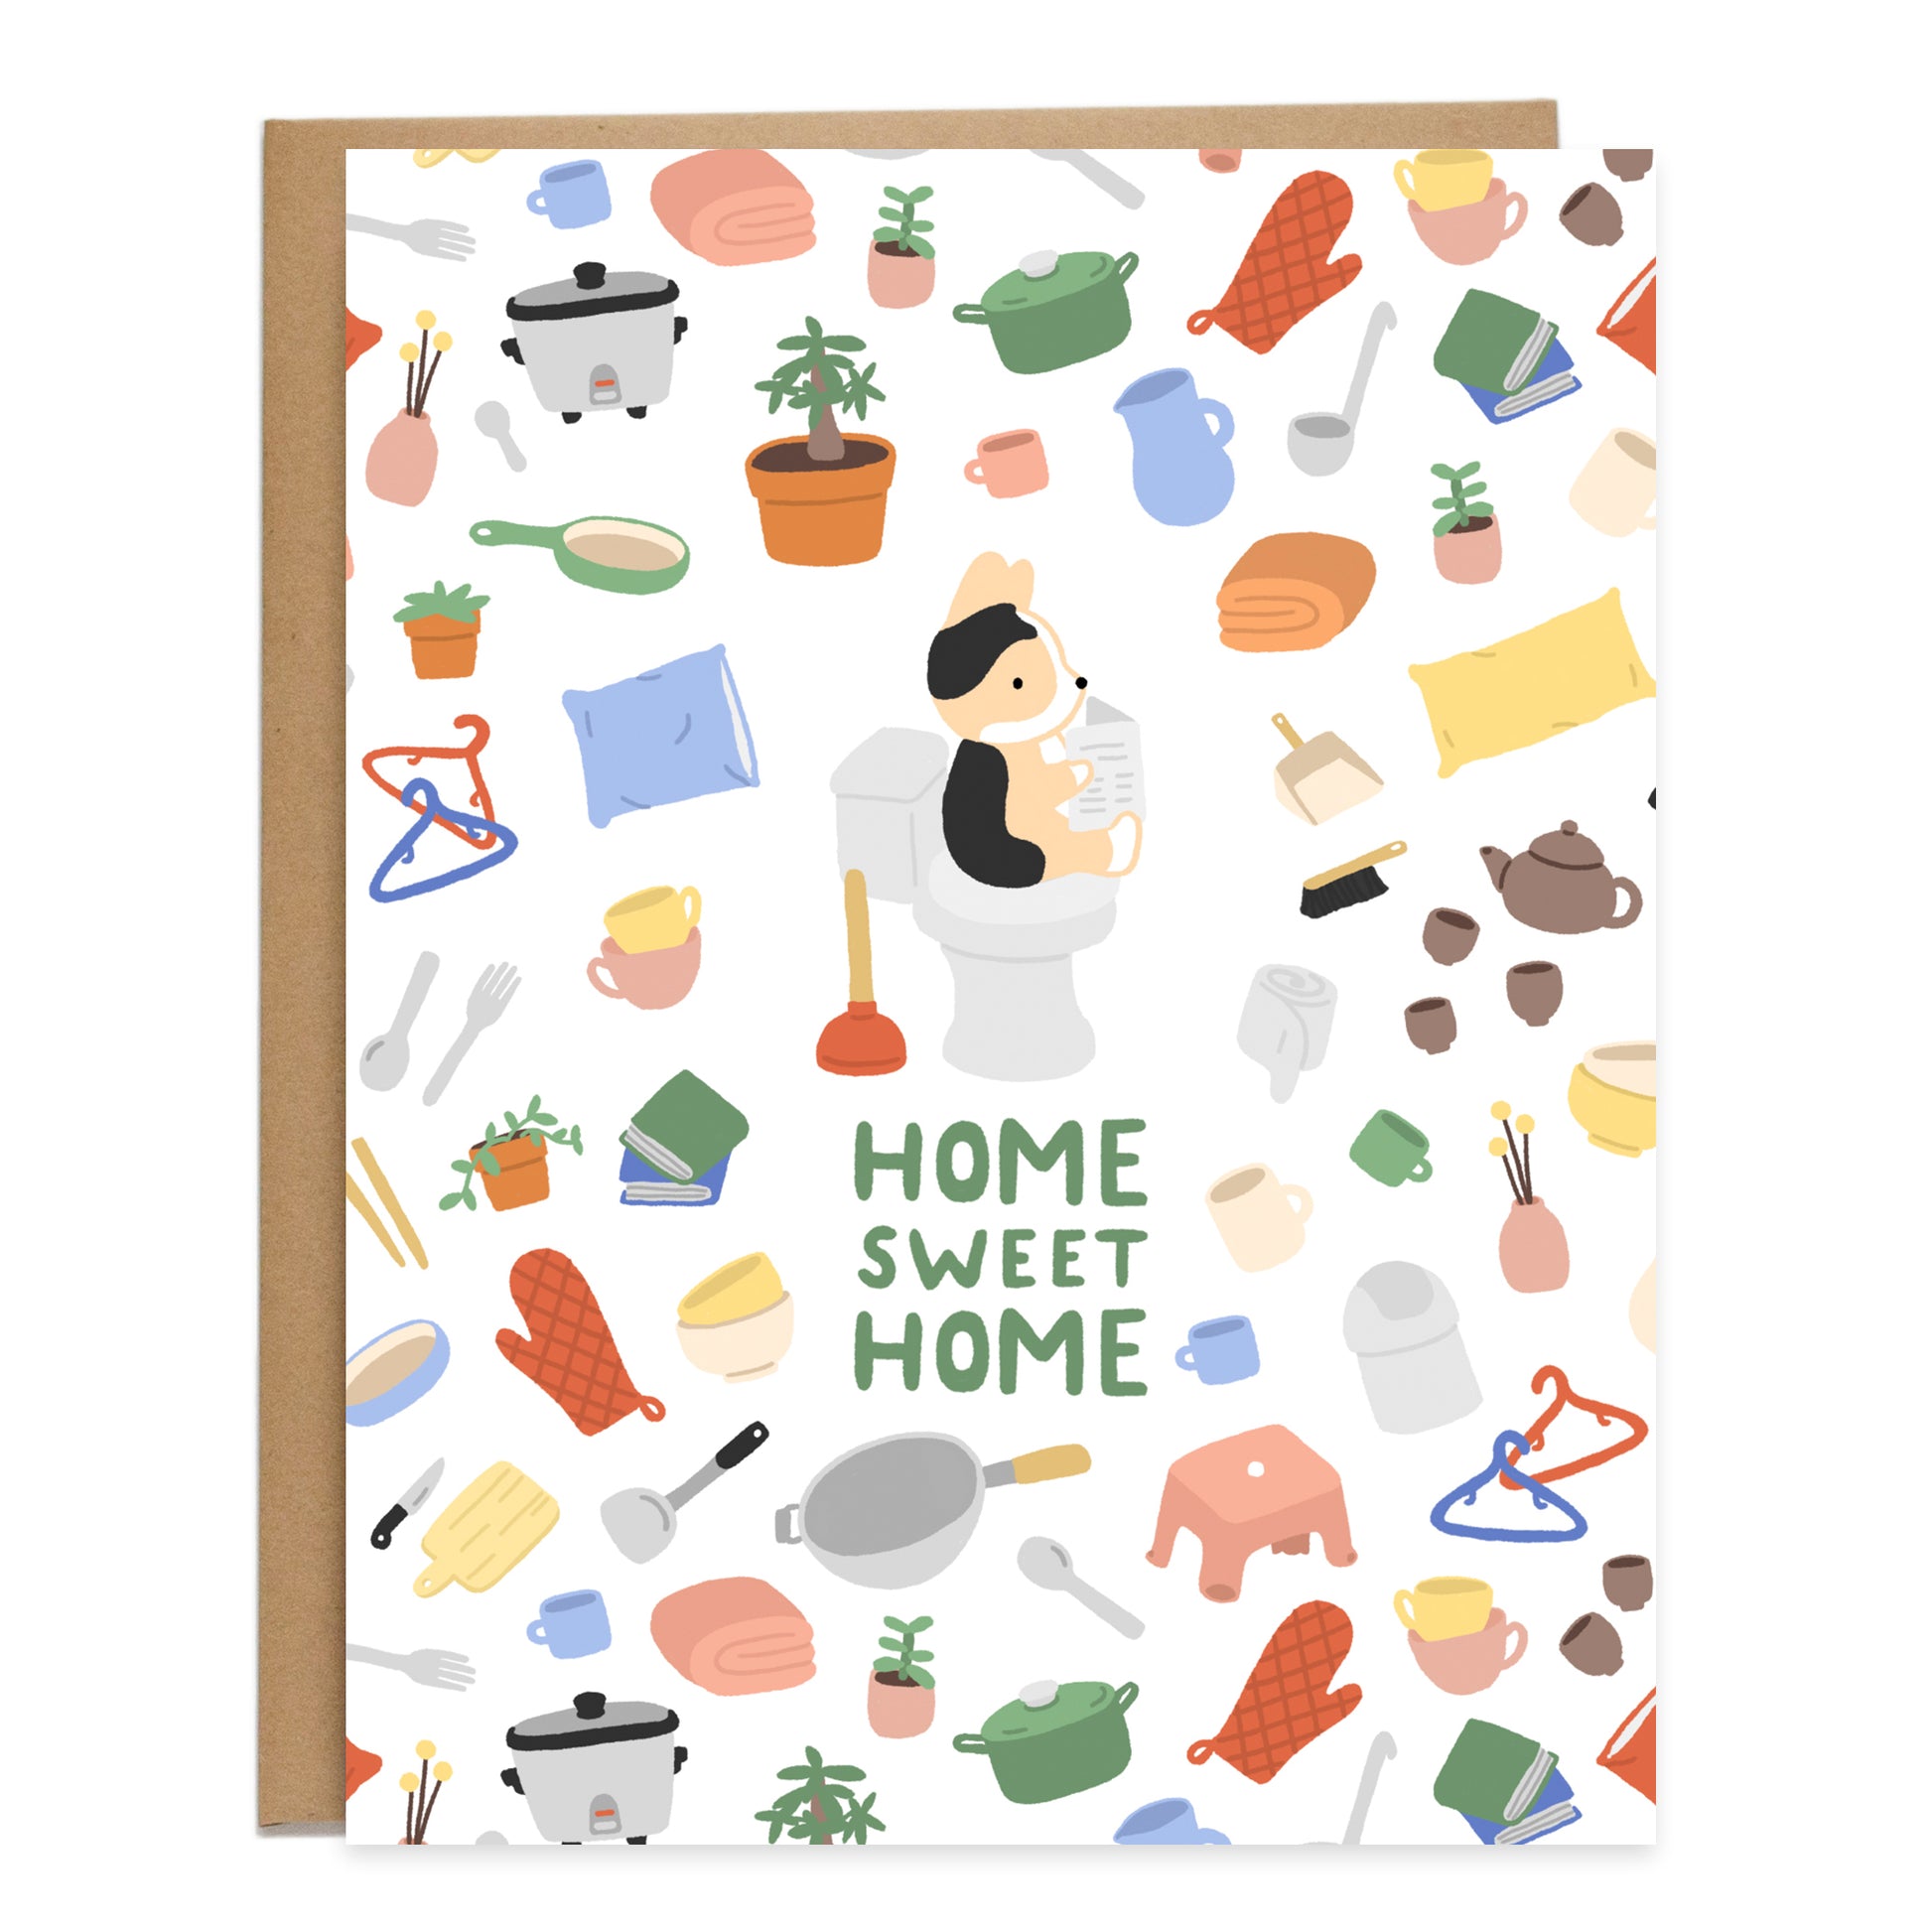 A tricolor corgi sitting on the toilet reading a newspaper in the center, surrounded by a pattern of homewares like kitchen tools, teapot and cups, rice cooker, wok, pots, plants, and cups. Card reads, Home sweet home, in green bubbly handwriting